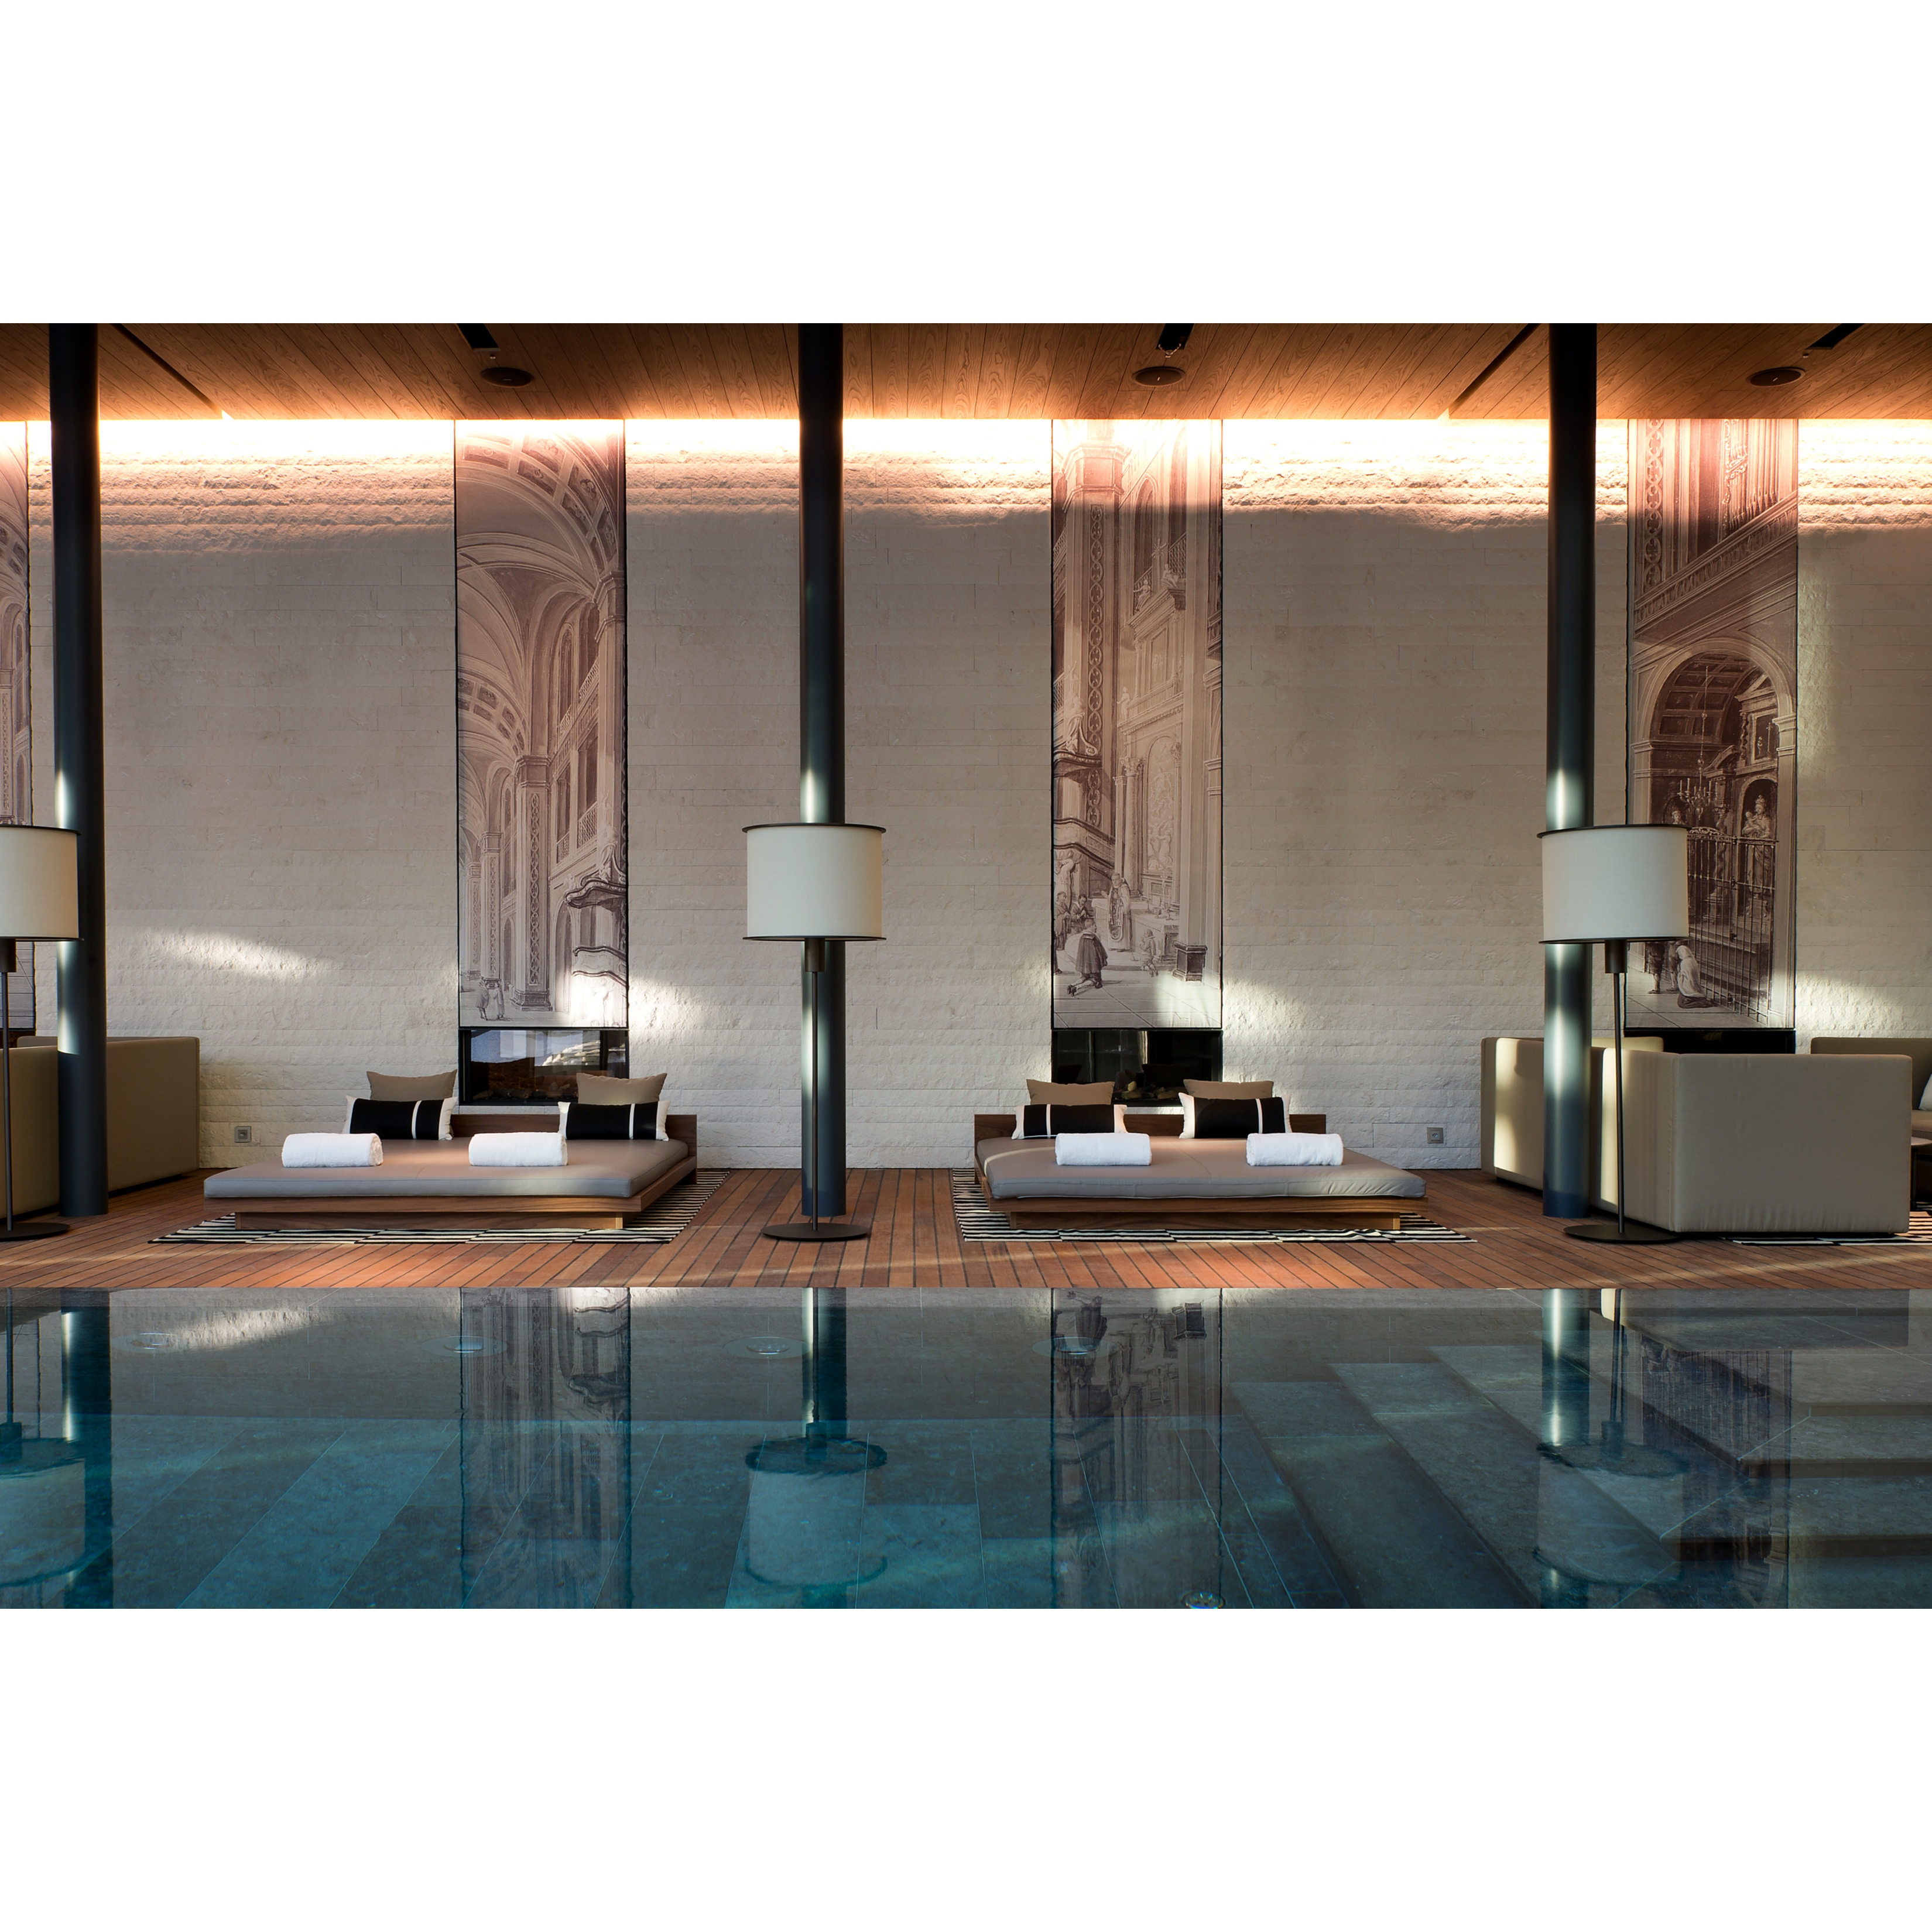 The Chedi Andermatt - Swiss Alps Luxury Hotel - indoor pool and lounge chairs of luxury spa hotel